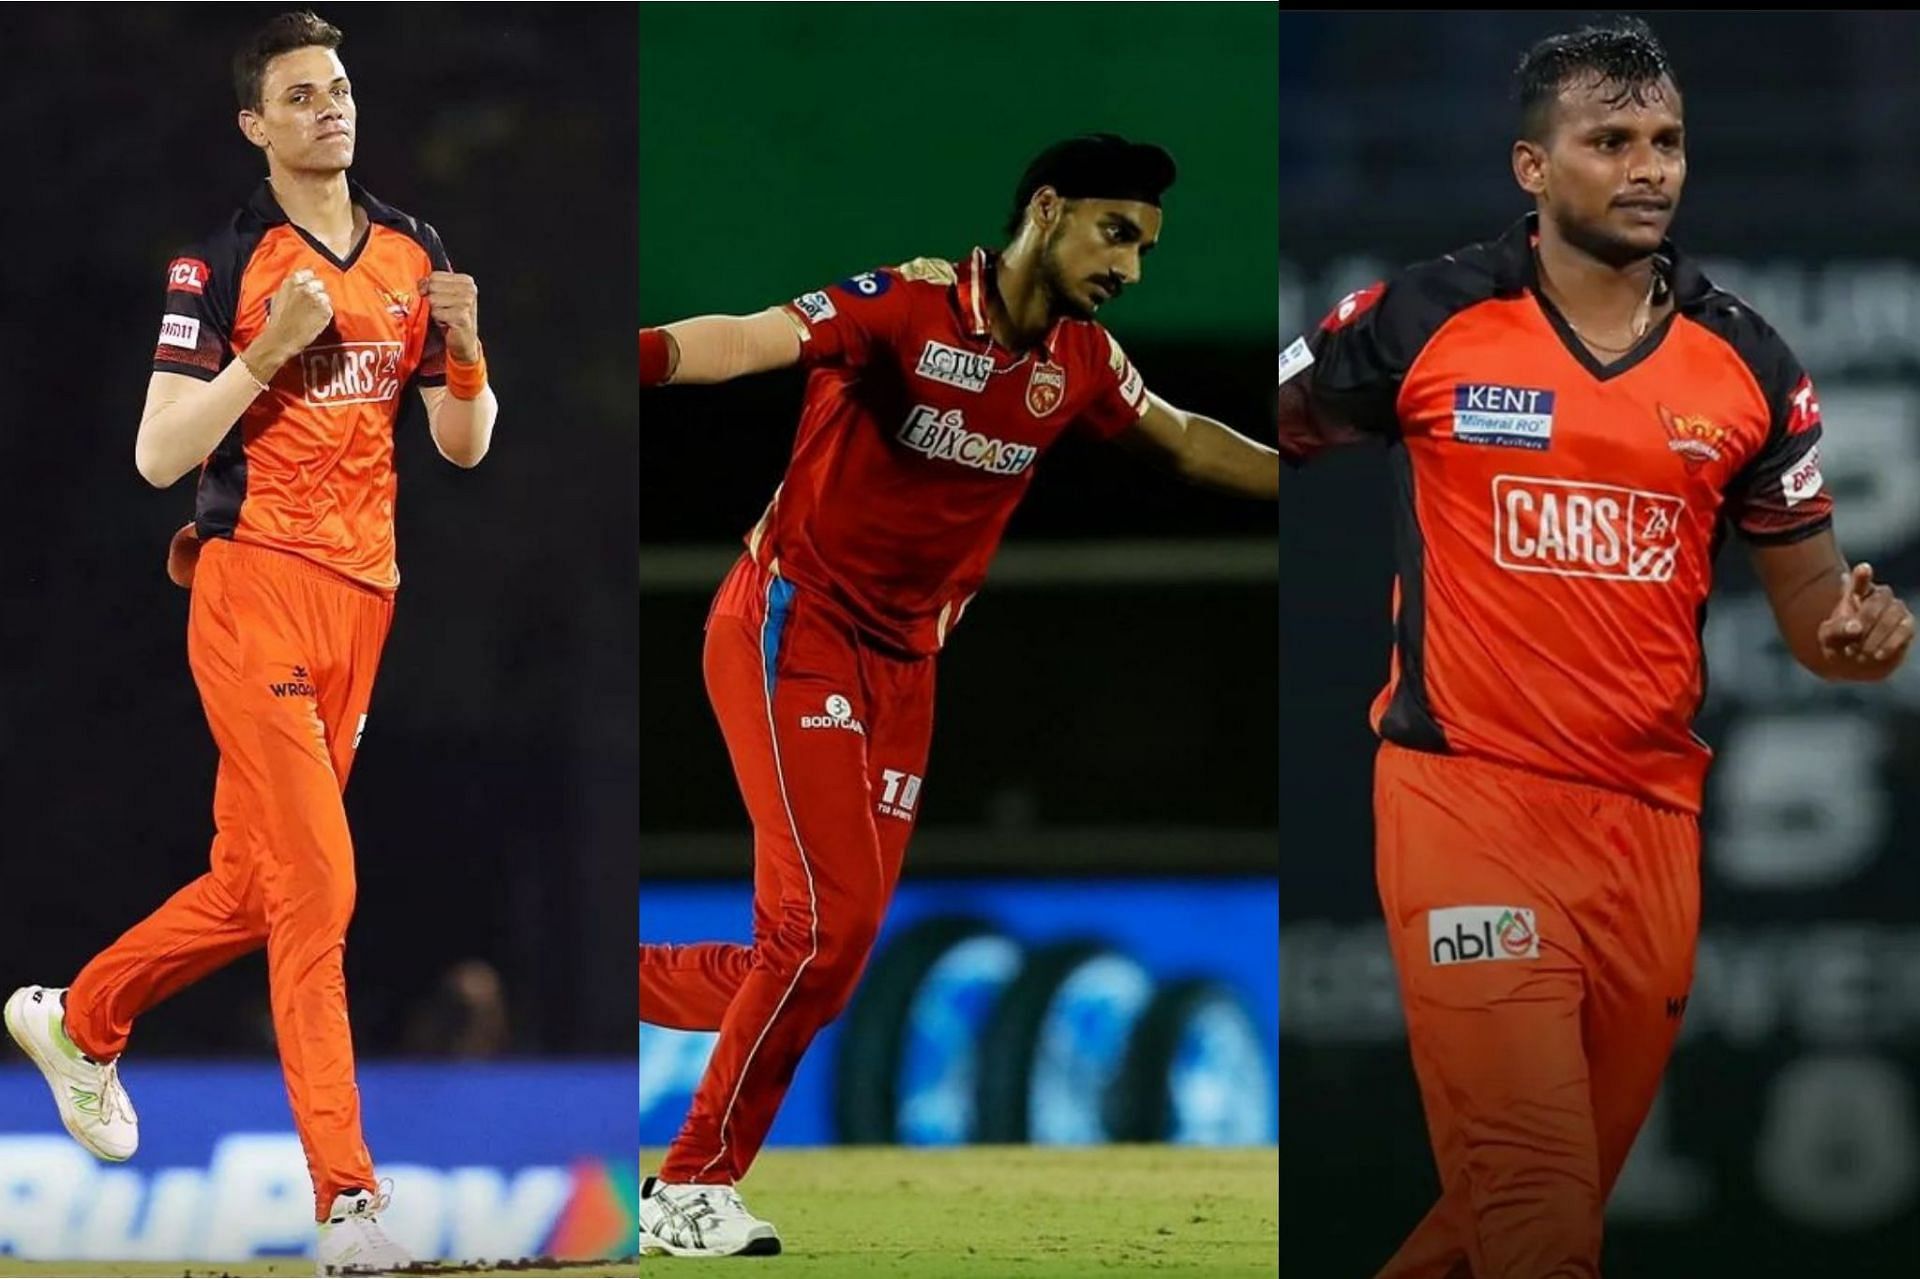 Match 28 of the ongoing IPL 2022 will be played between the Punjab Kings and Sunrisers Hyderabad